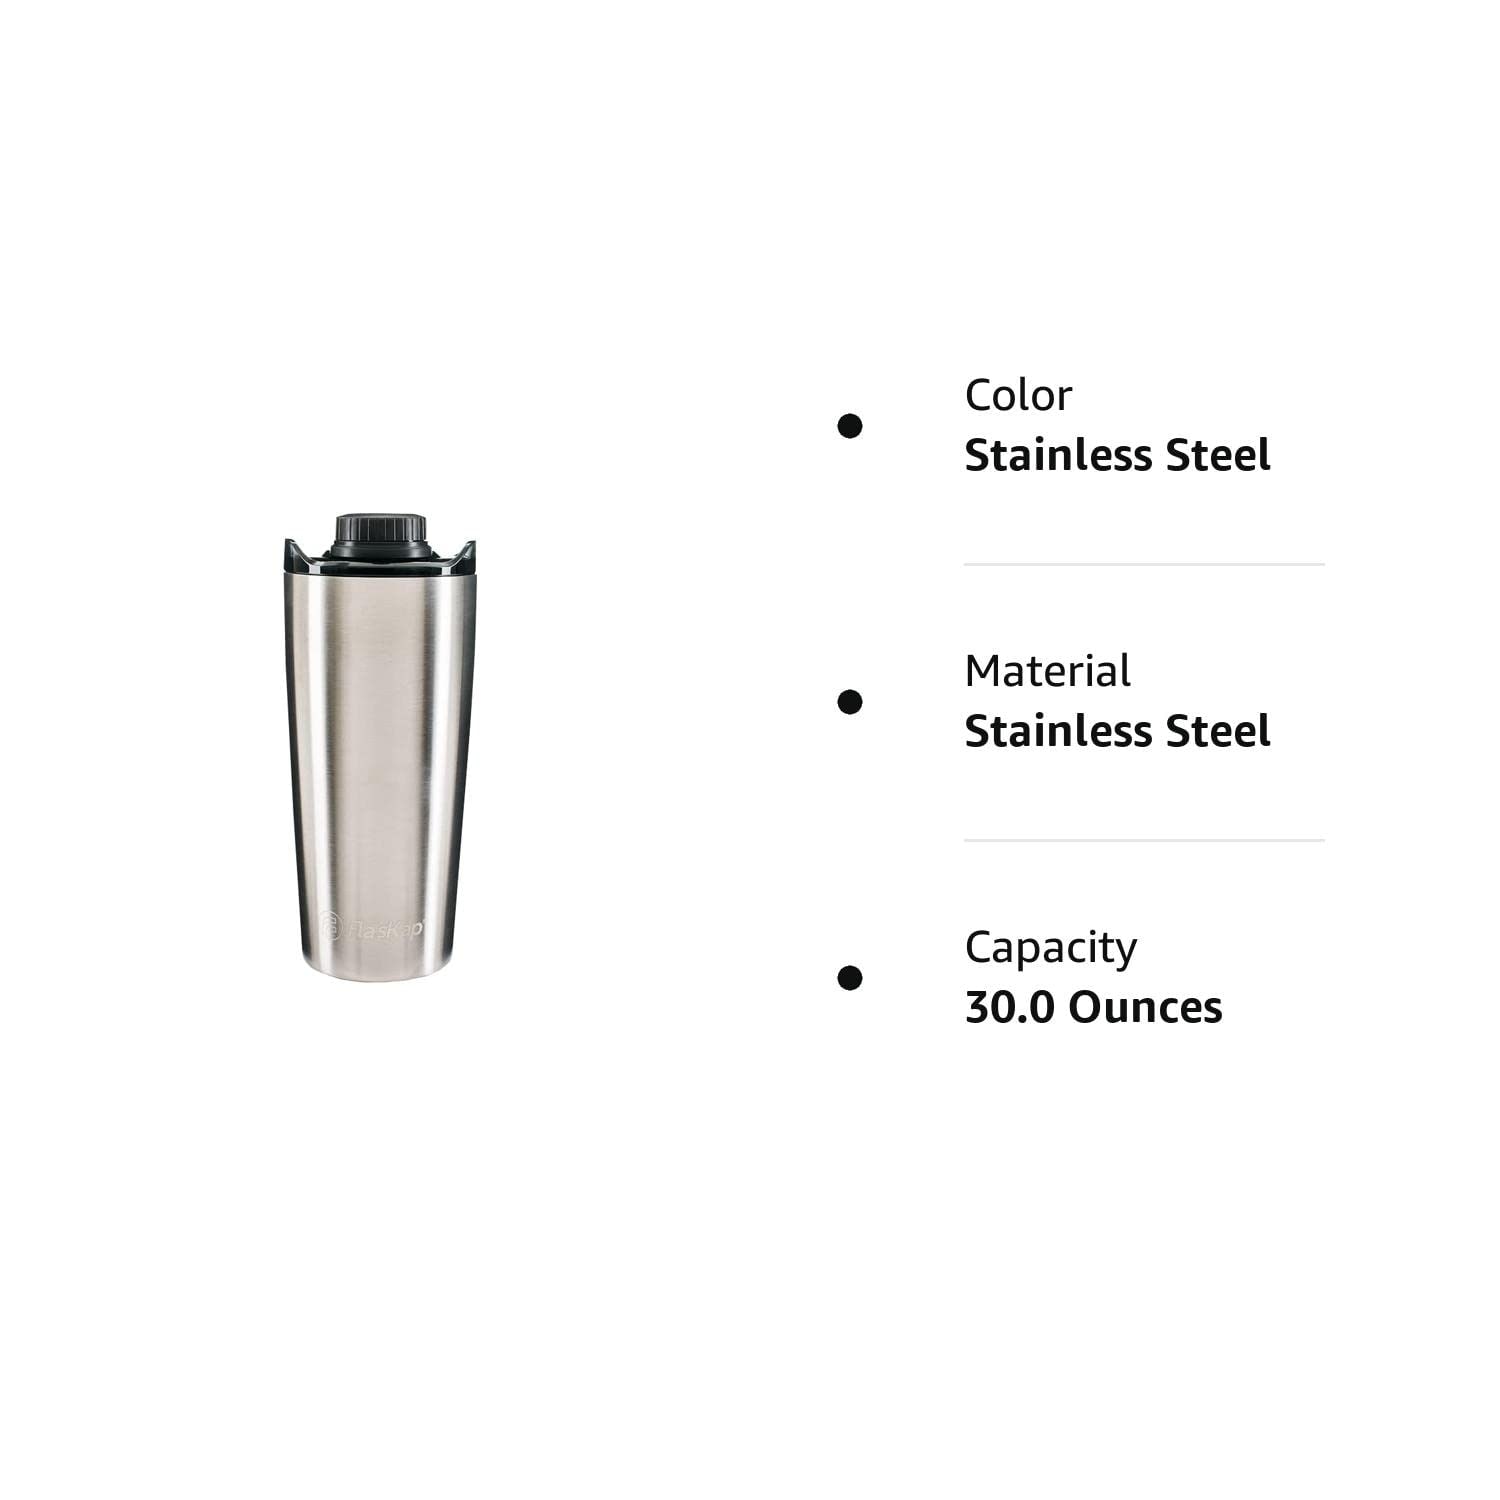 https://ak1.ostkcdn.com/images/products/is/images/direct/b1ab5fc199446fc763ceb14d1ad56a5e41817b00/Volst-30-Insulated-Tumbler-with-Standard-Lid-%7C-Keeps-Drinks-Warm-or-Cold-%7C-Cup-Holder-Friendly-%7C-Splash-Resistant-Cup-%2830-oz%29.jpg